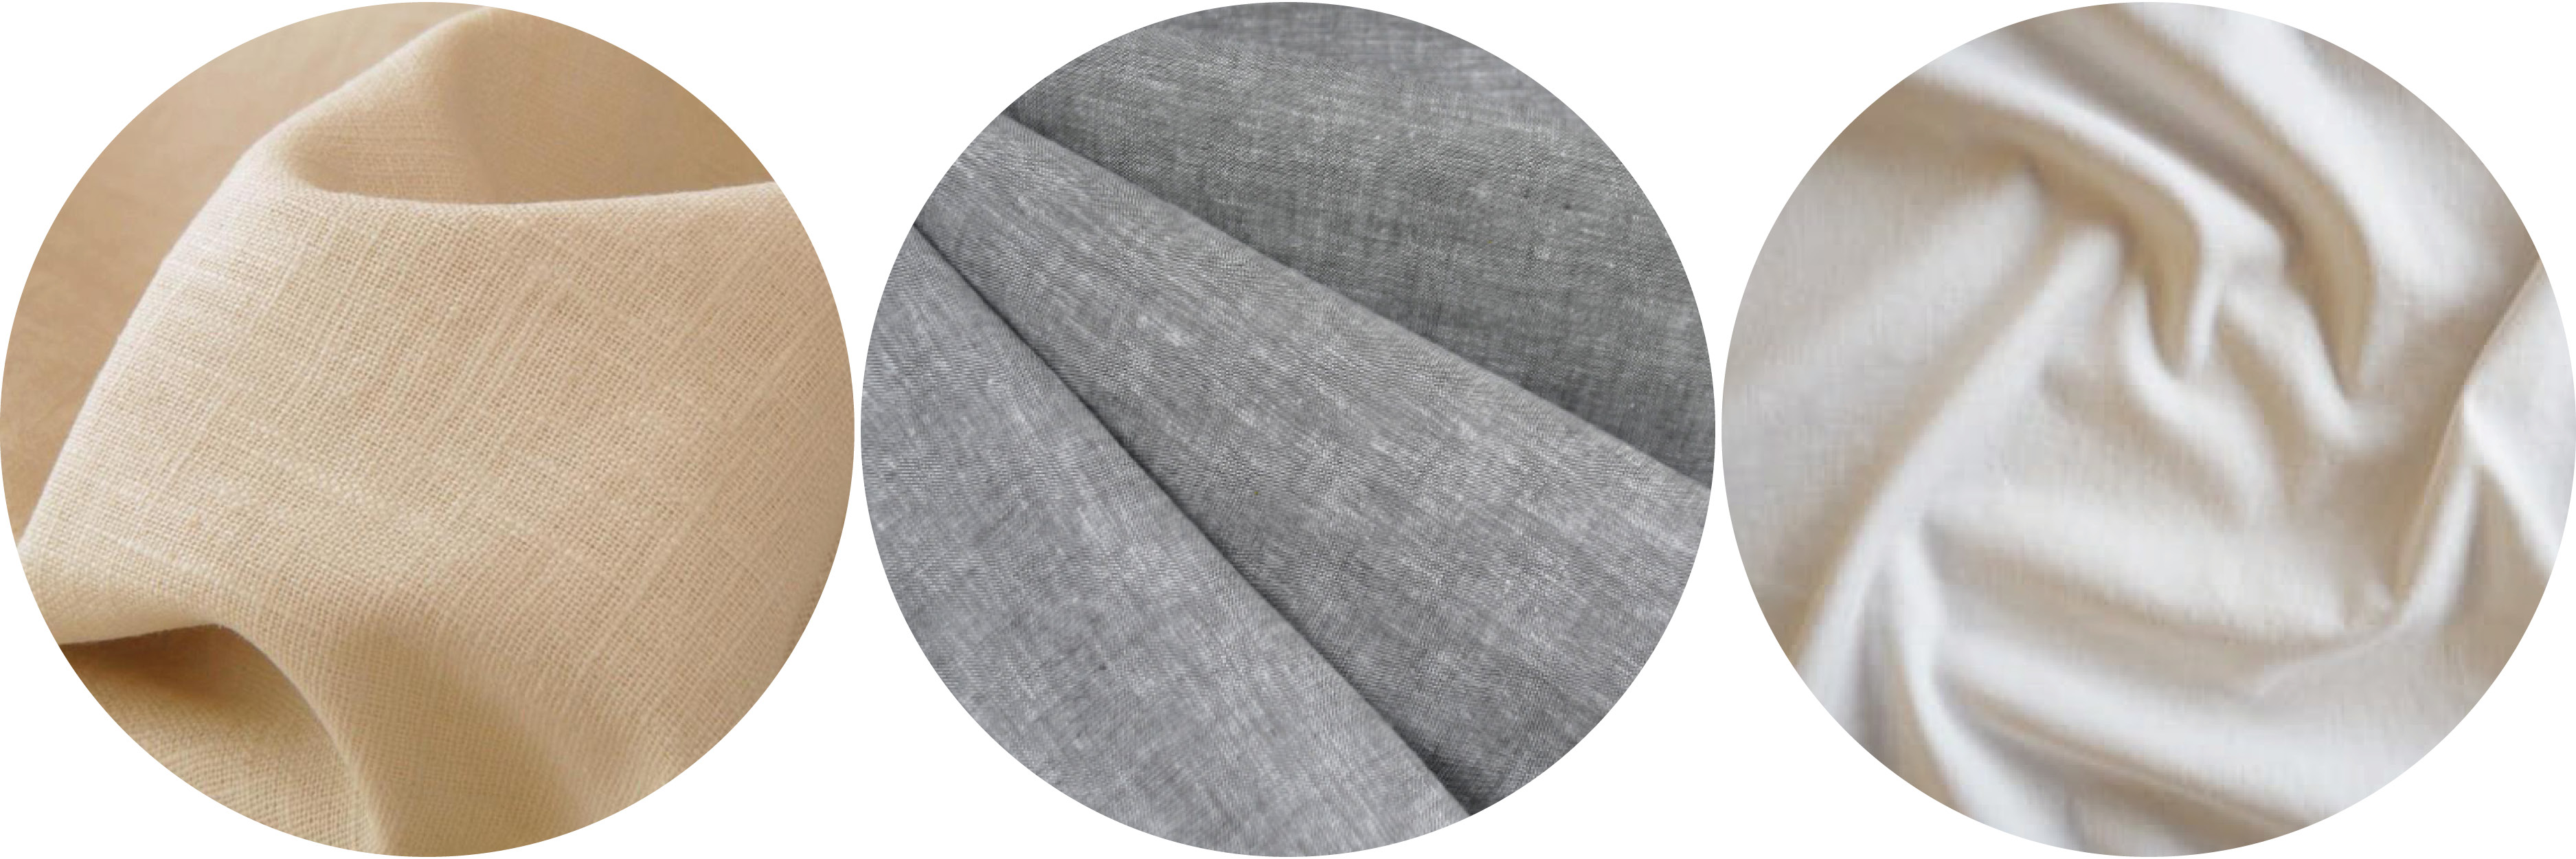 Plain Cotton Trouser Fabric, GSM: 250-300 GSM at Rs 350/meter in Tiruppur |  ID: 19670687655